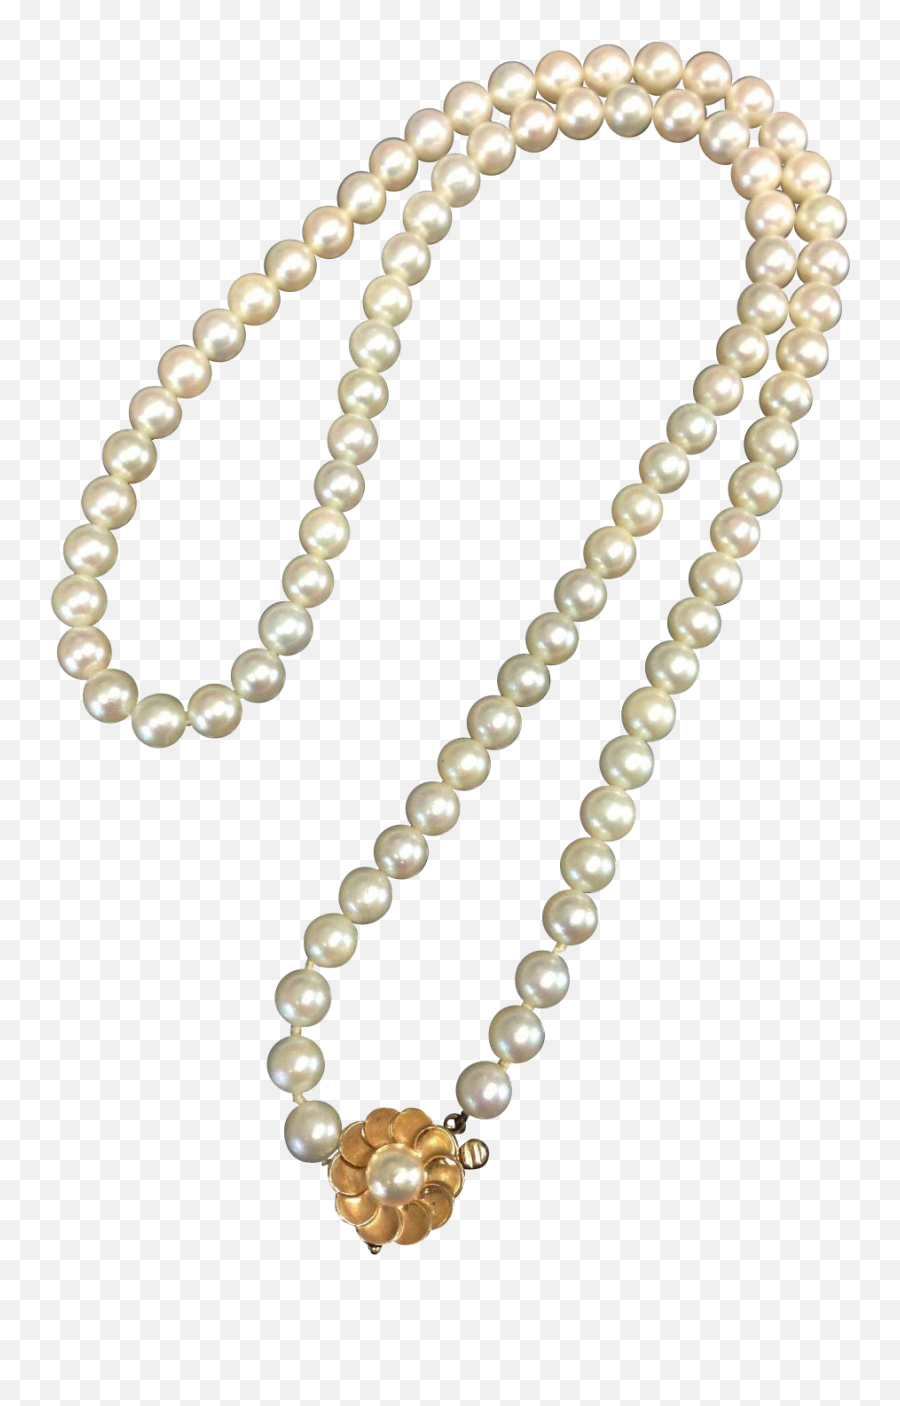 Download Pearl K Gold White Freshwater Cultured - Pearls Solid Emoji,Pearls Transparent Background